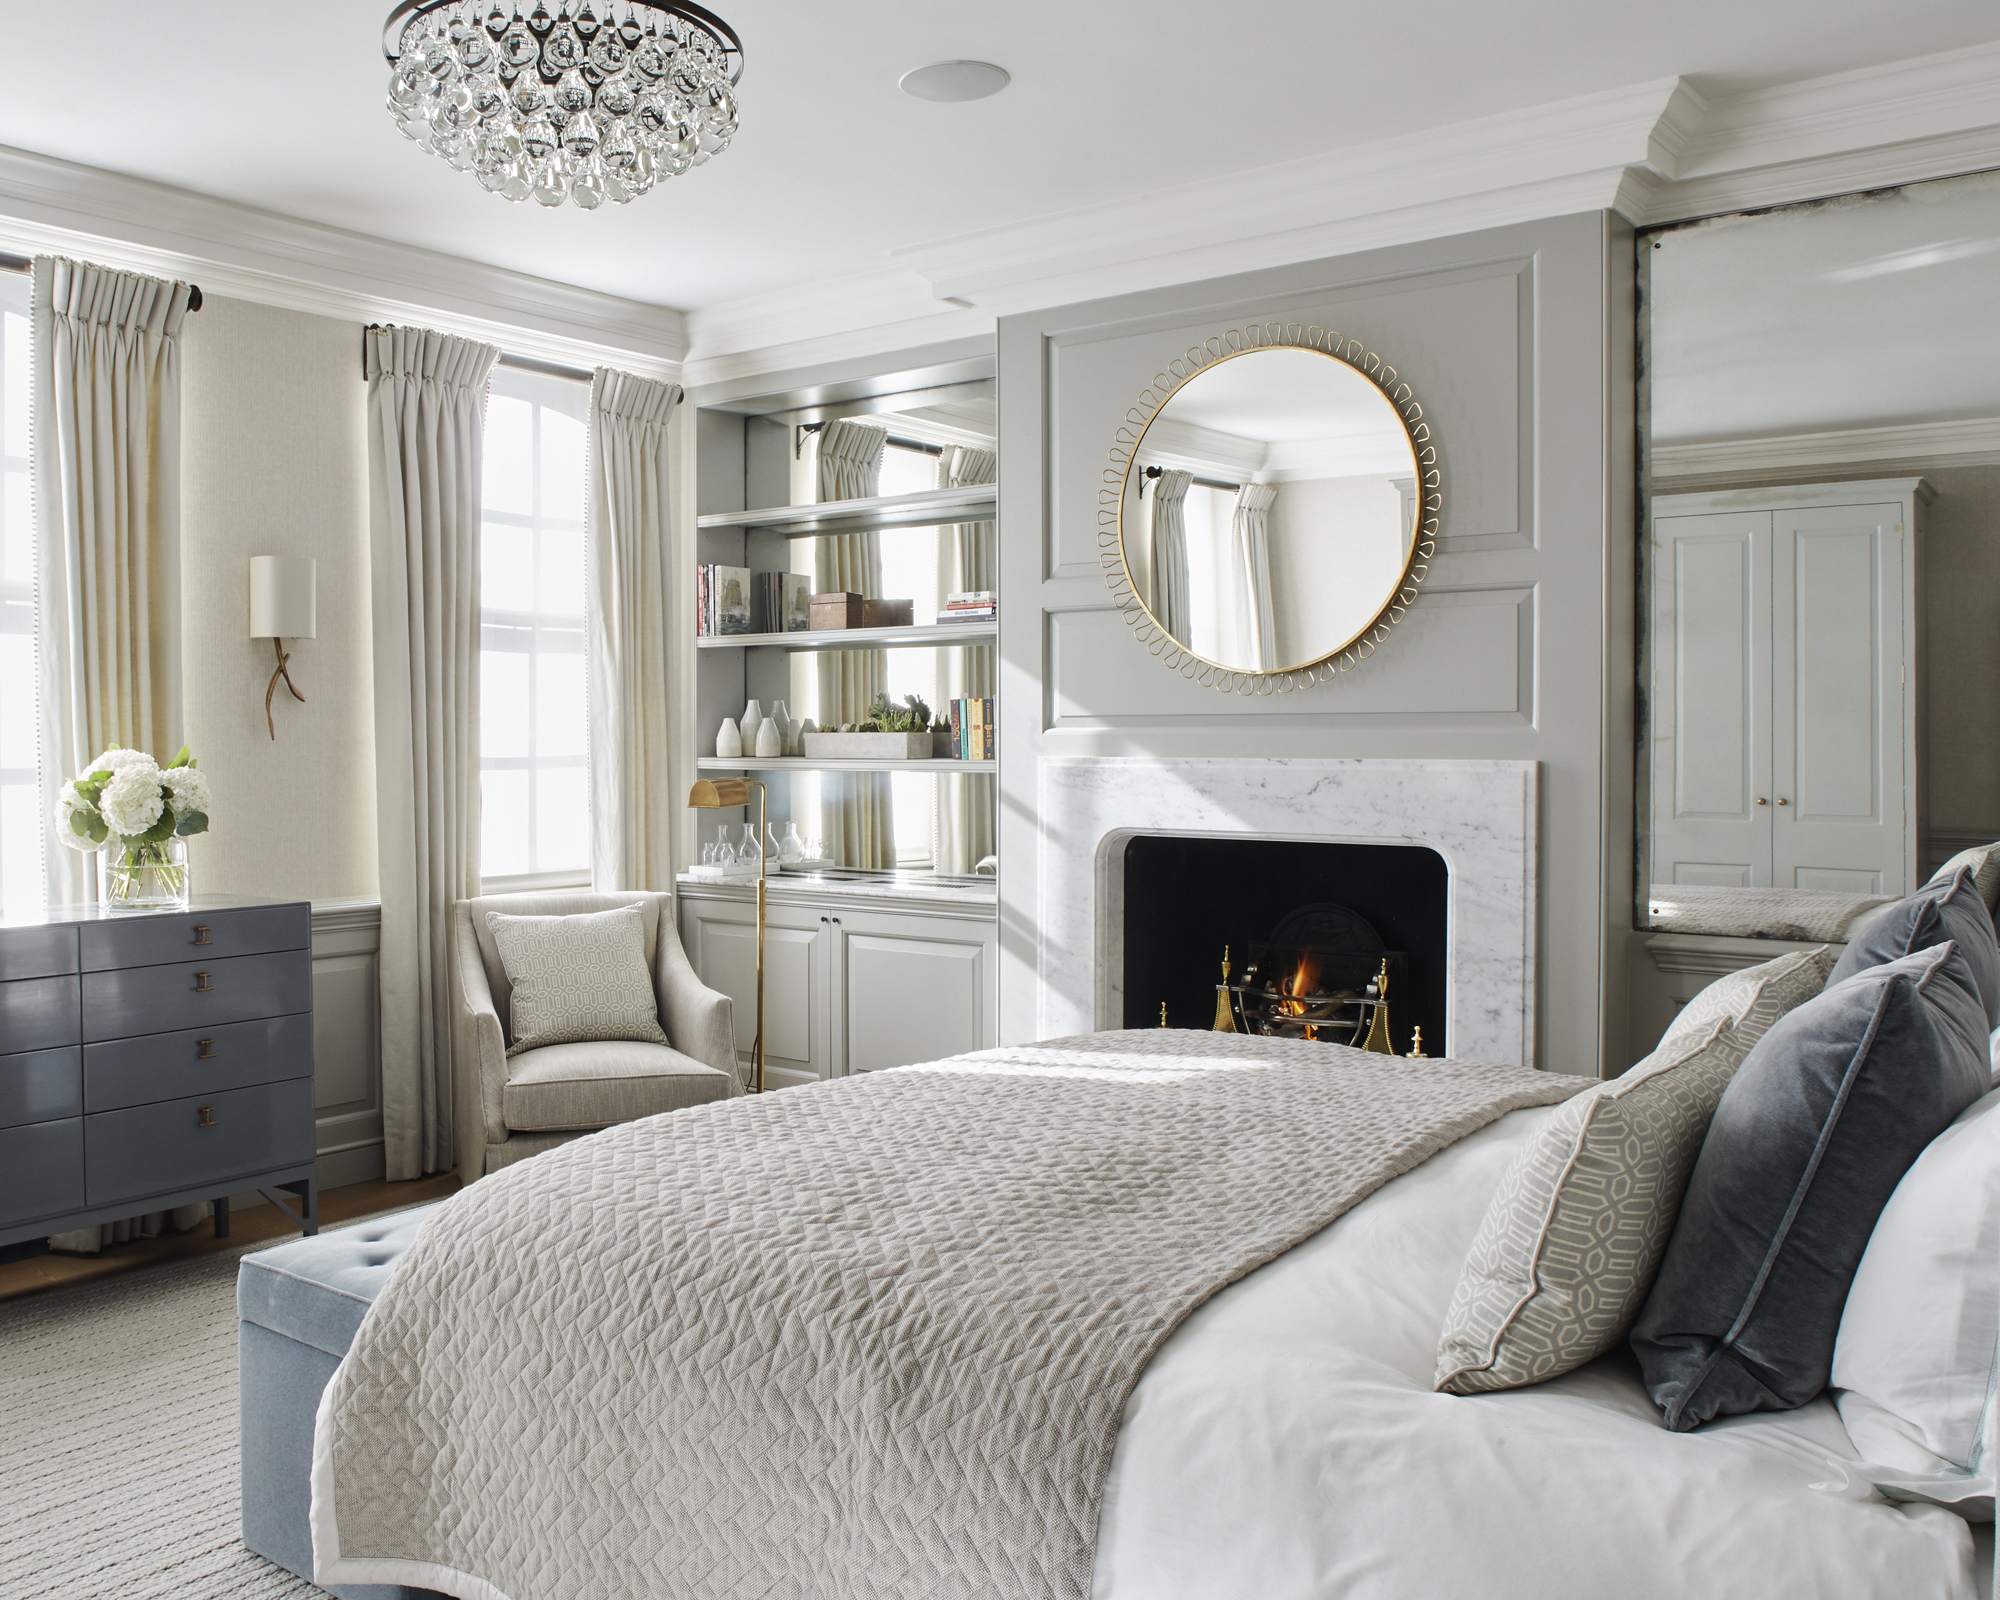 A grey bedroom idea with pale grey wall panels and large mirror over a marble fireplace